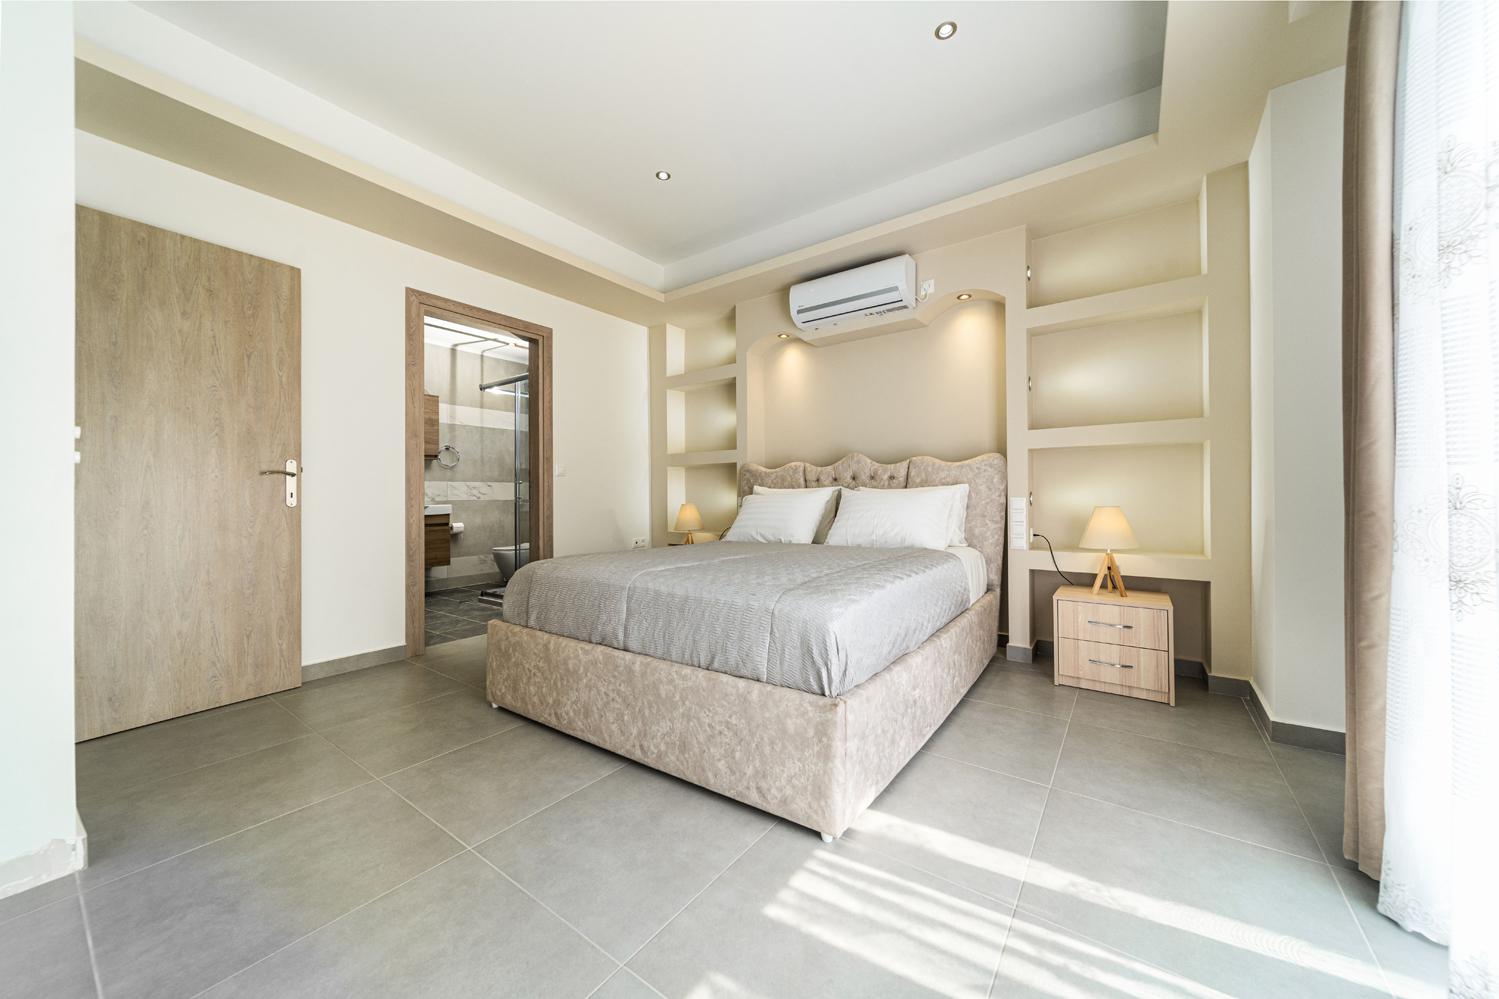 Double bedroom with A/C, en suite bathroom and  terrace access with panoramic views